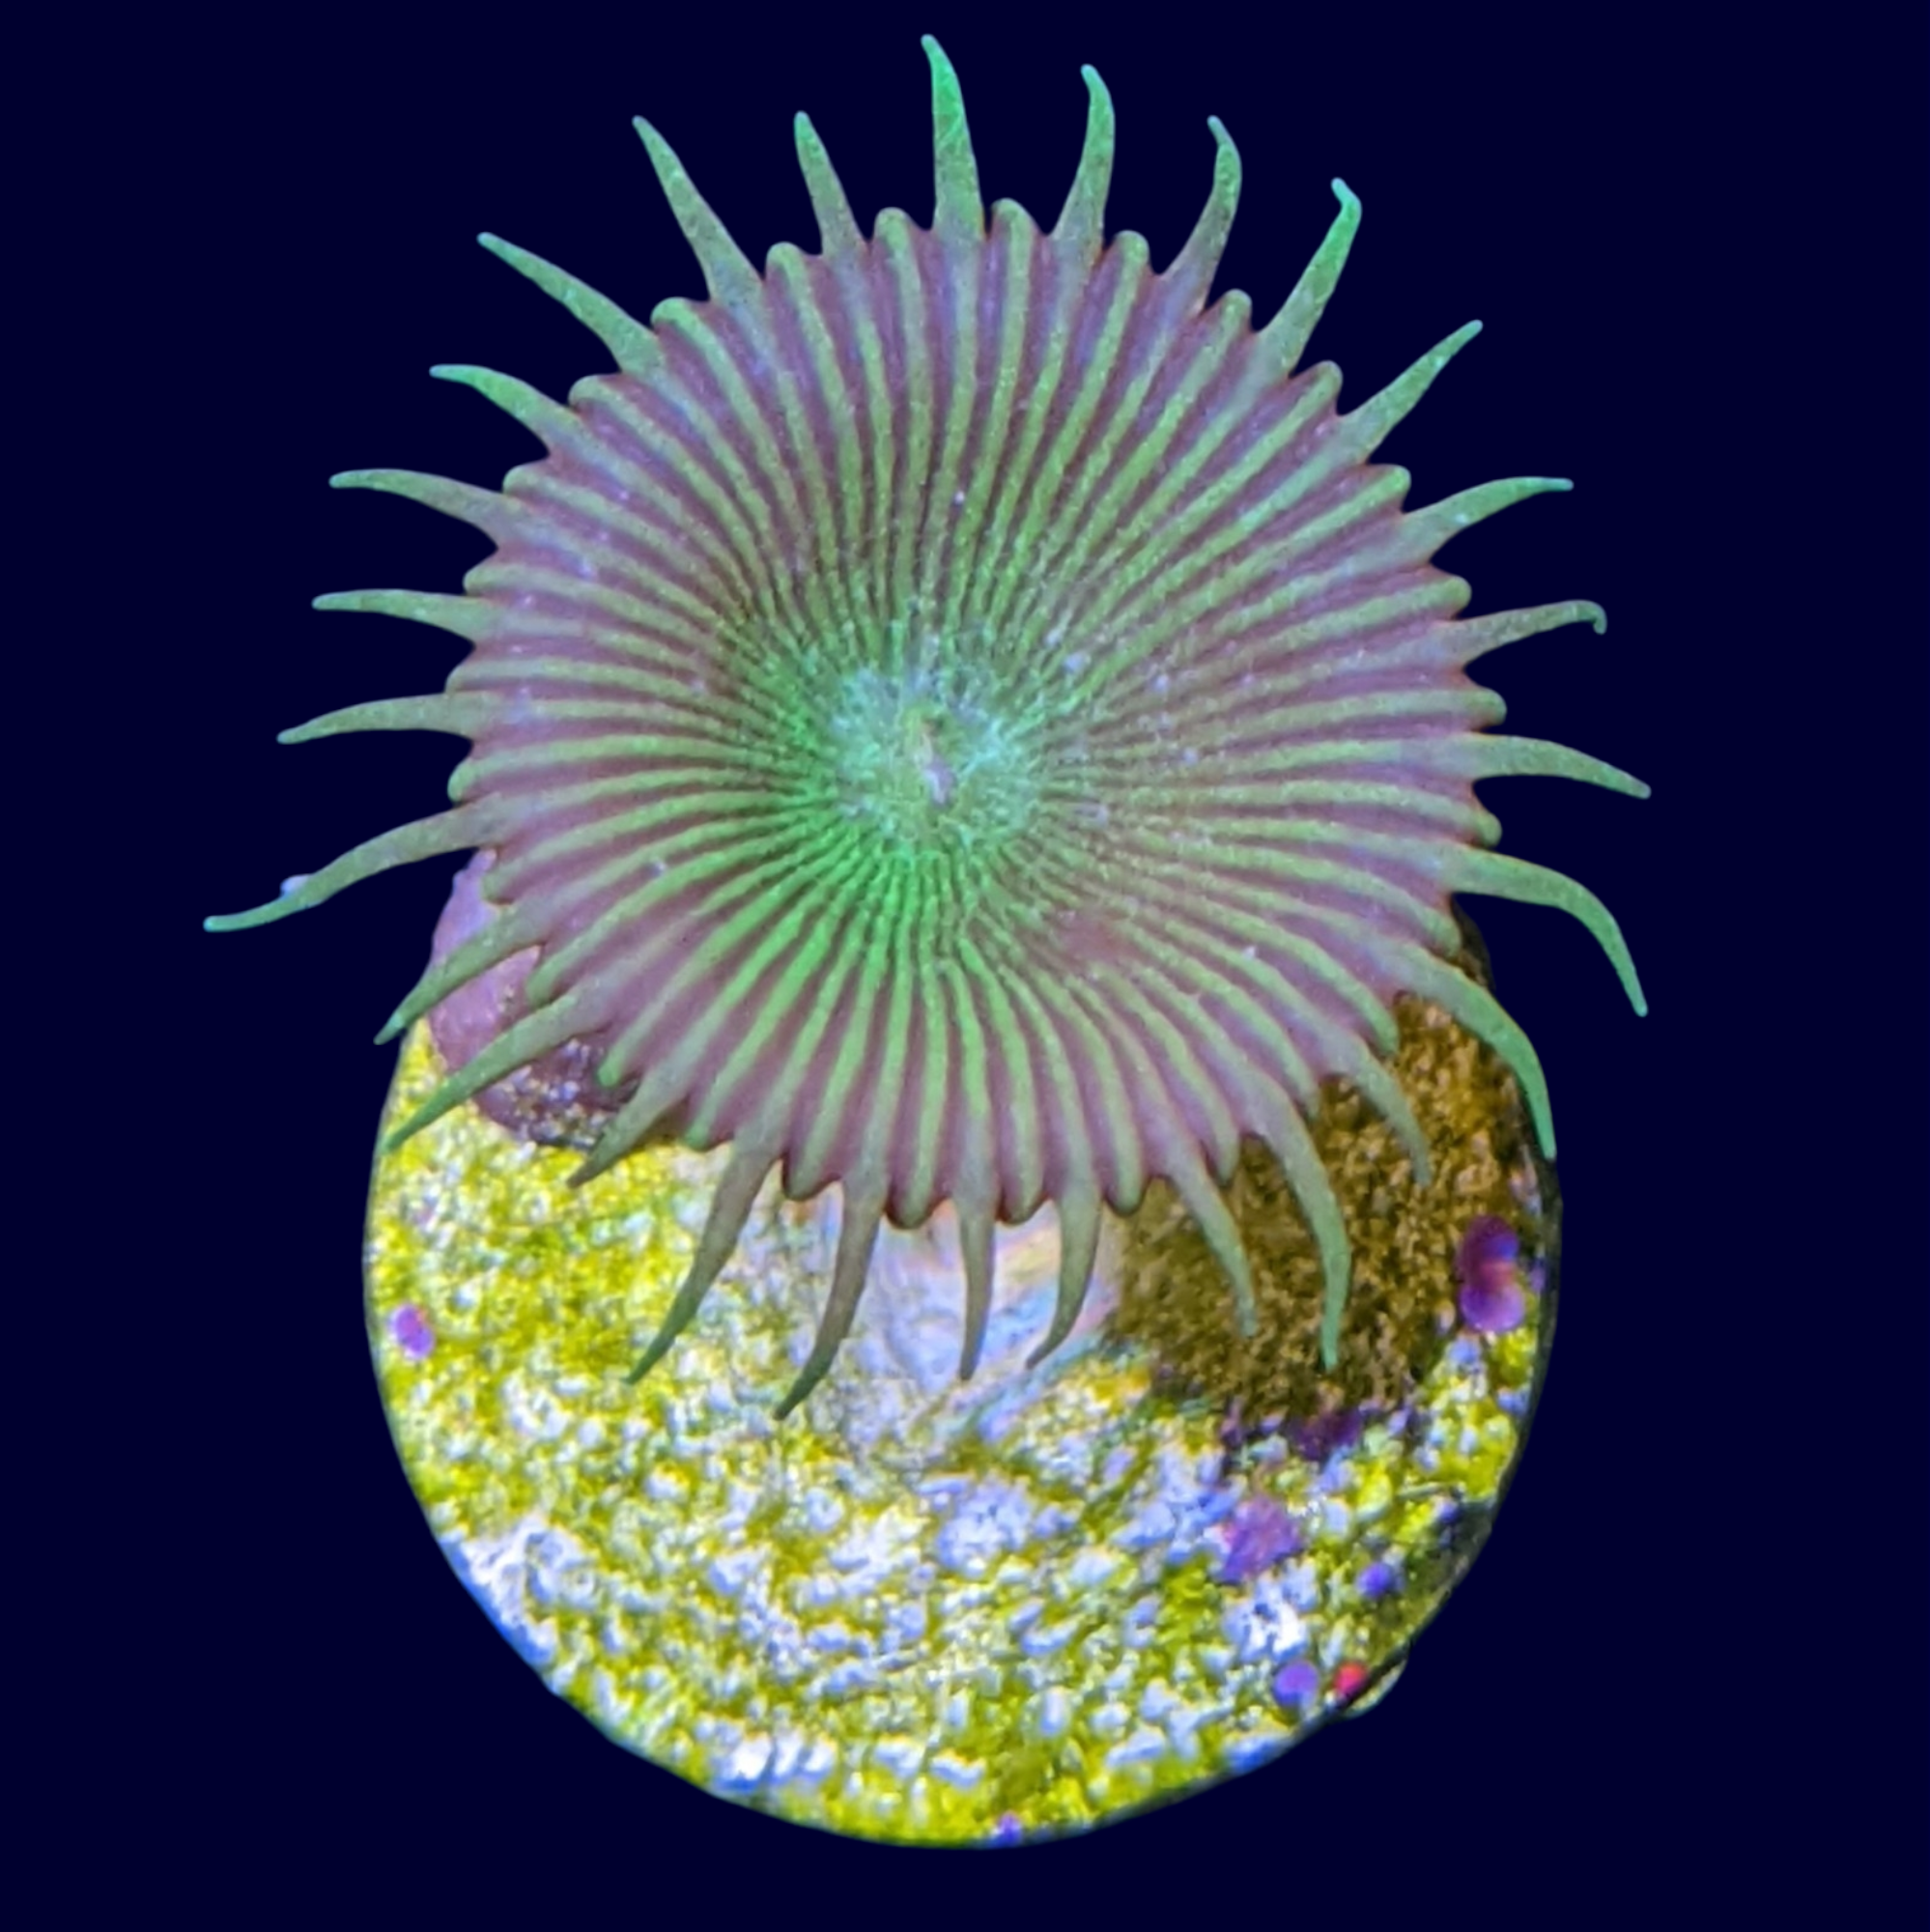 Green Paly Zoa Frag (UK Grown)